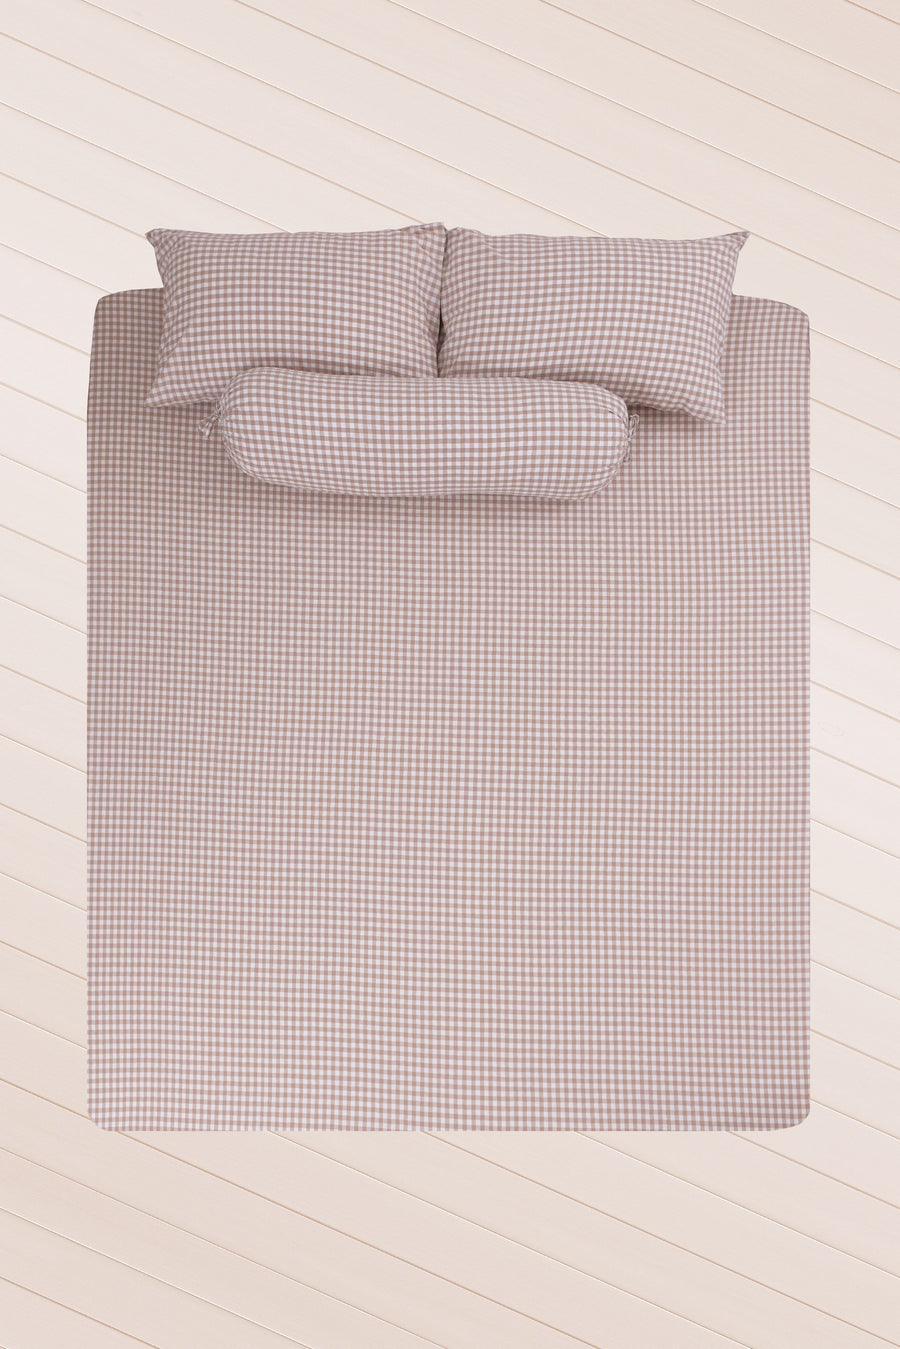 Elly Gingham Q 4-pc Fitted Sheet Set (Tortilla)